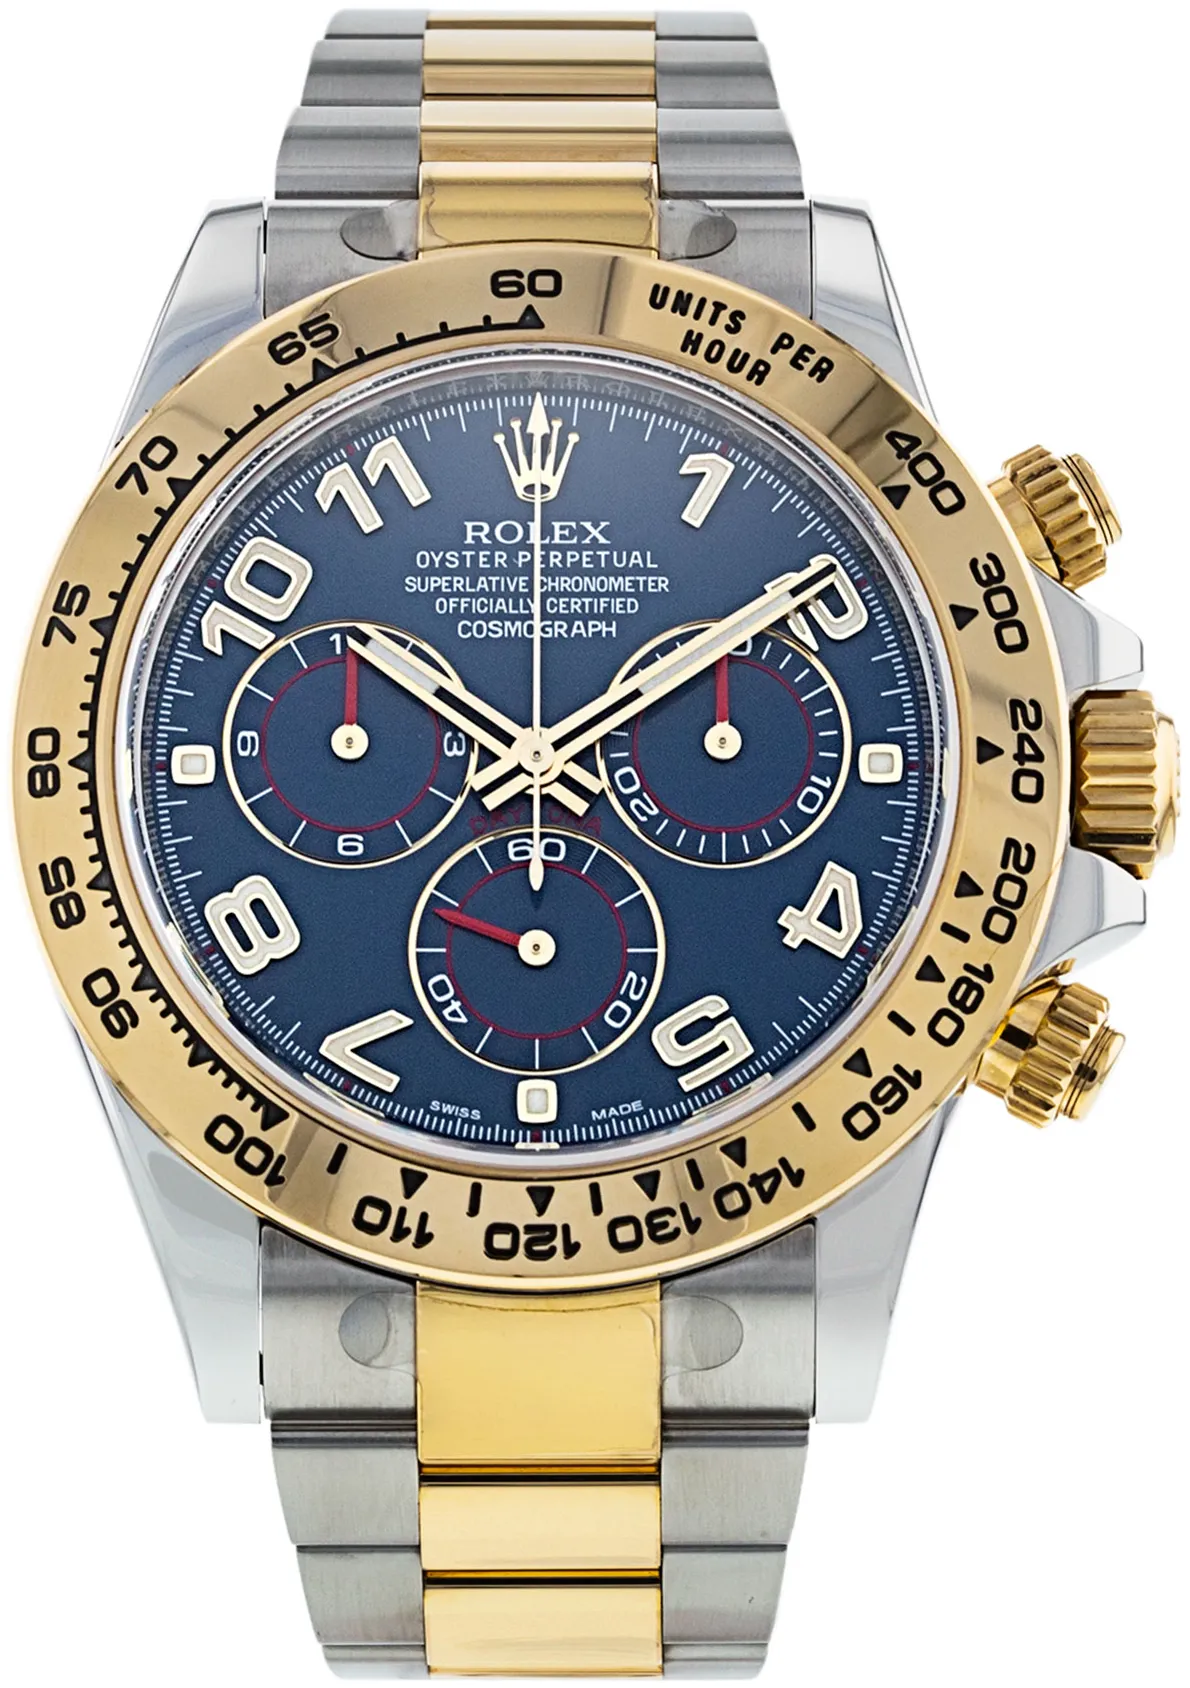 Rolex Daytona 116503 40mm Yellow gold and stainless steel •